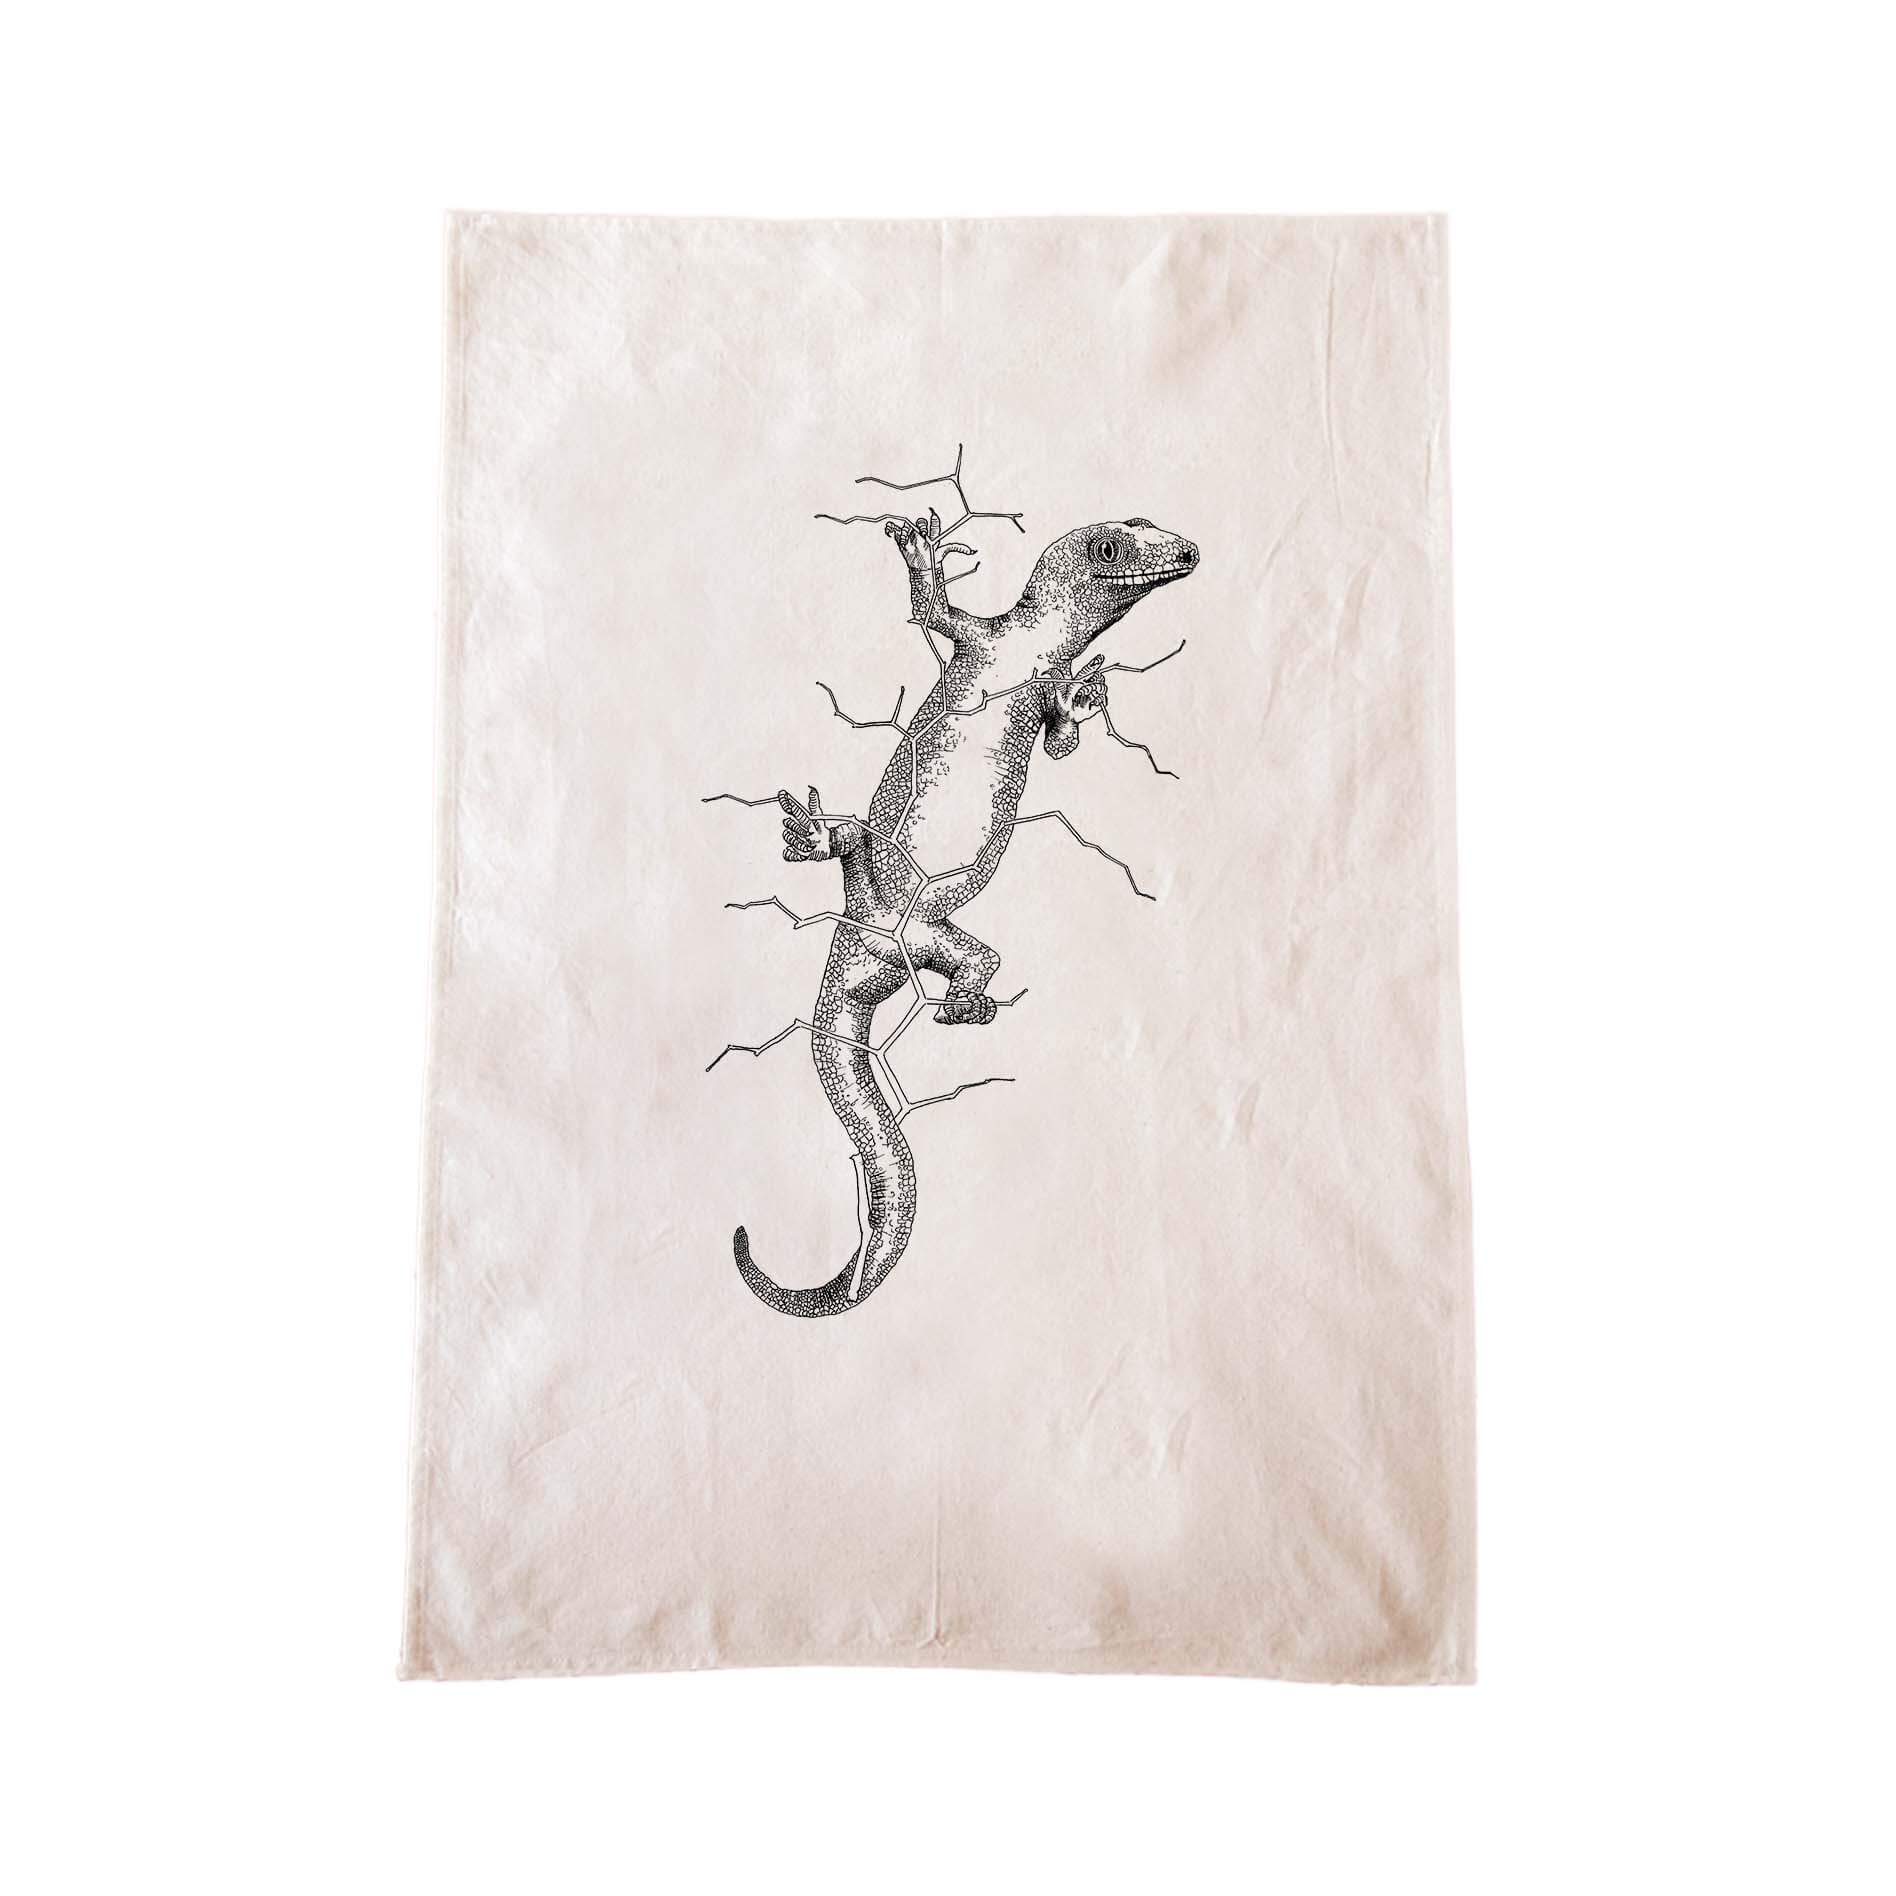 Off-white cotton tea towel with a screen printed Gecko design.